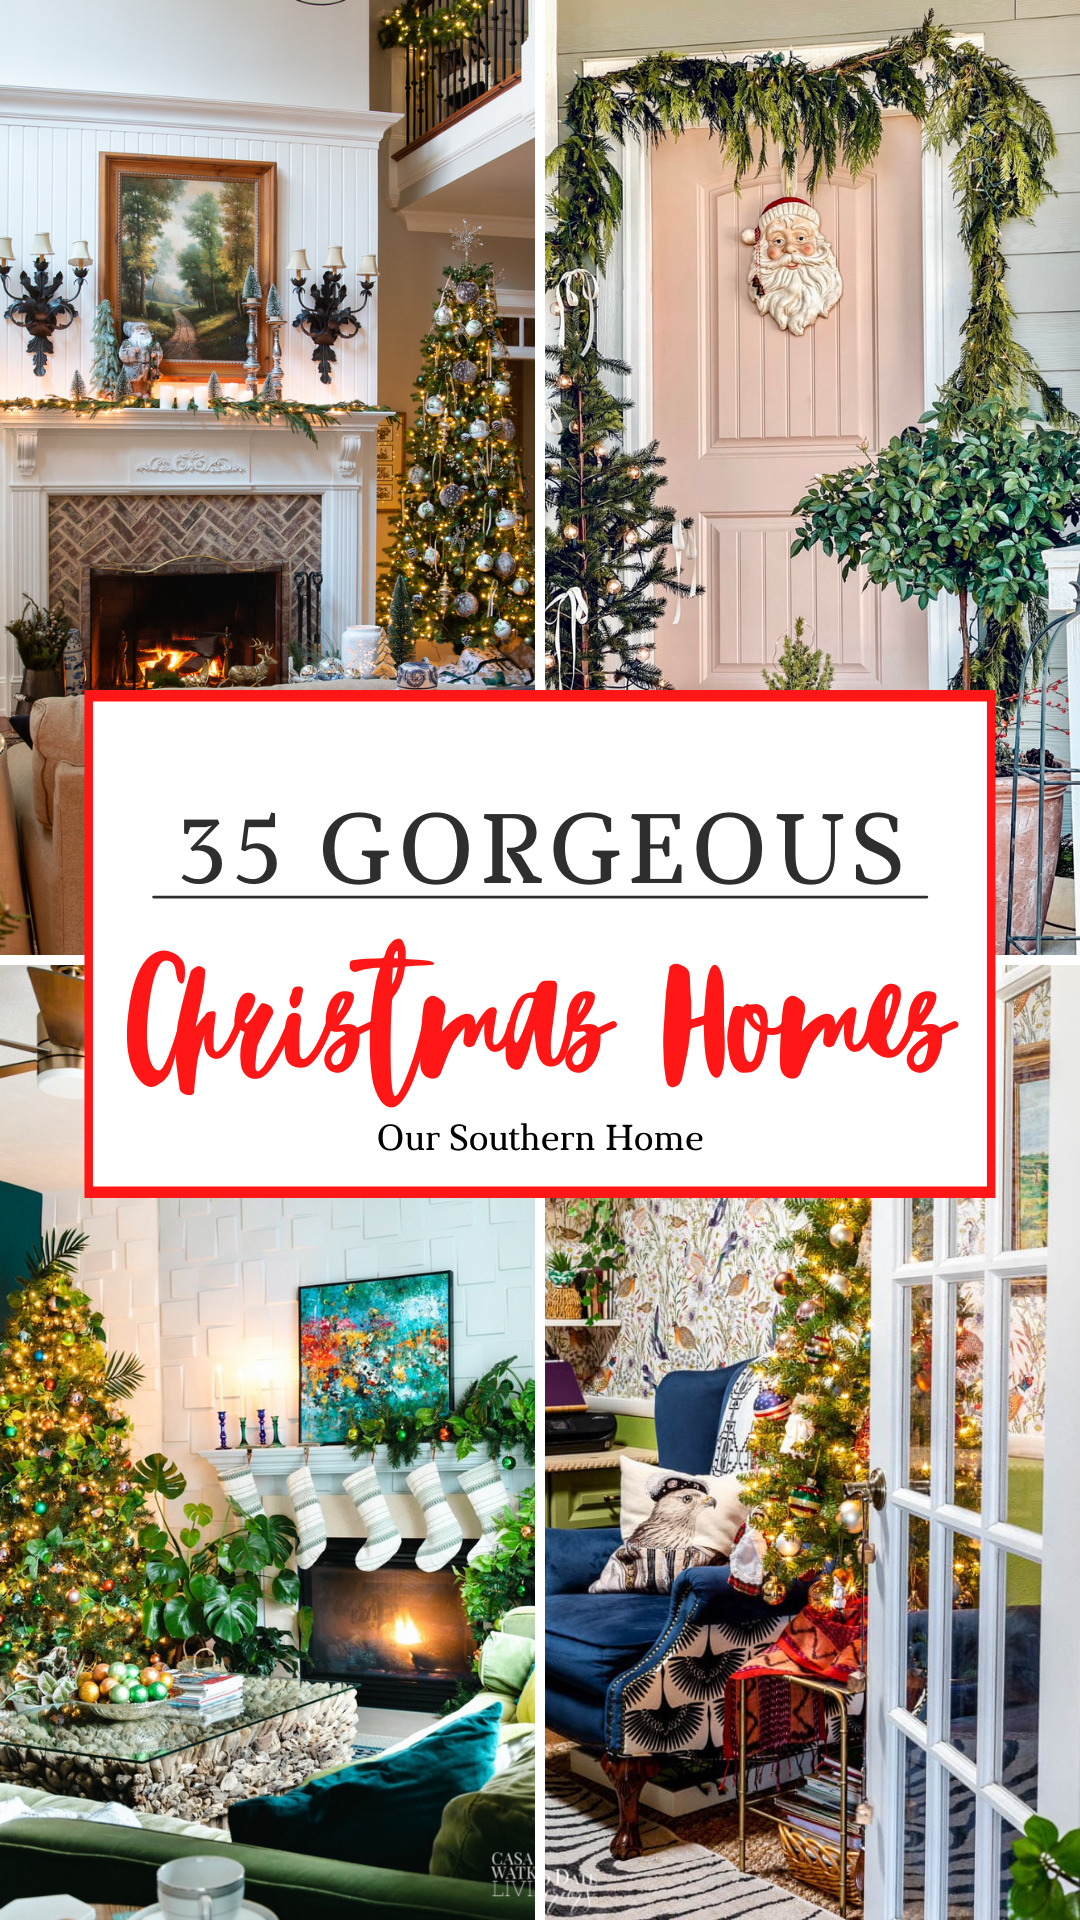 https://www.oursouthernhomesc.com/wp-content/uploads/35-gorgeous-christmas-homes.jpg